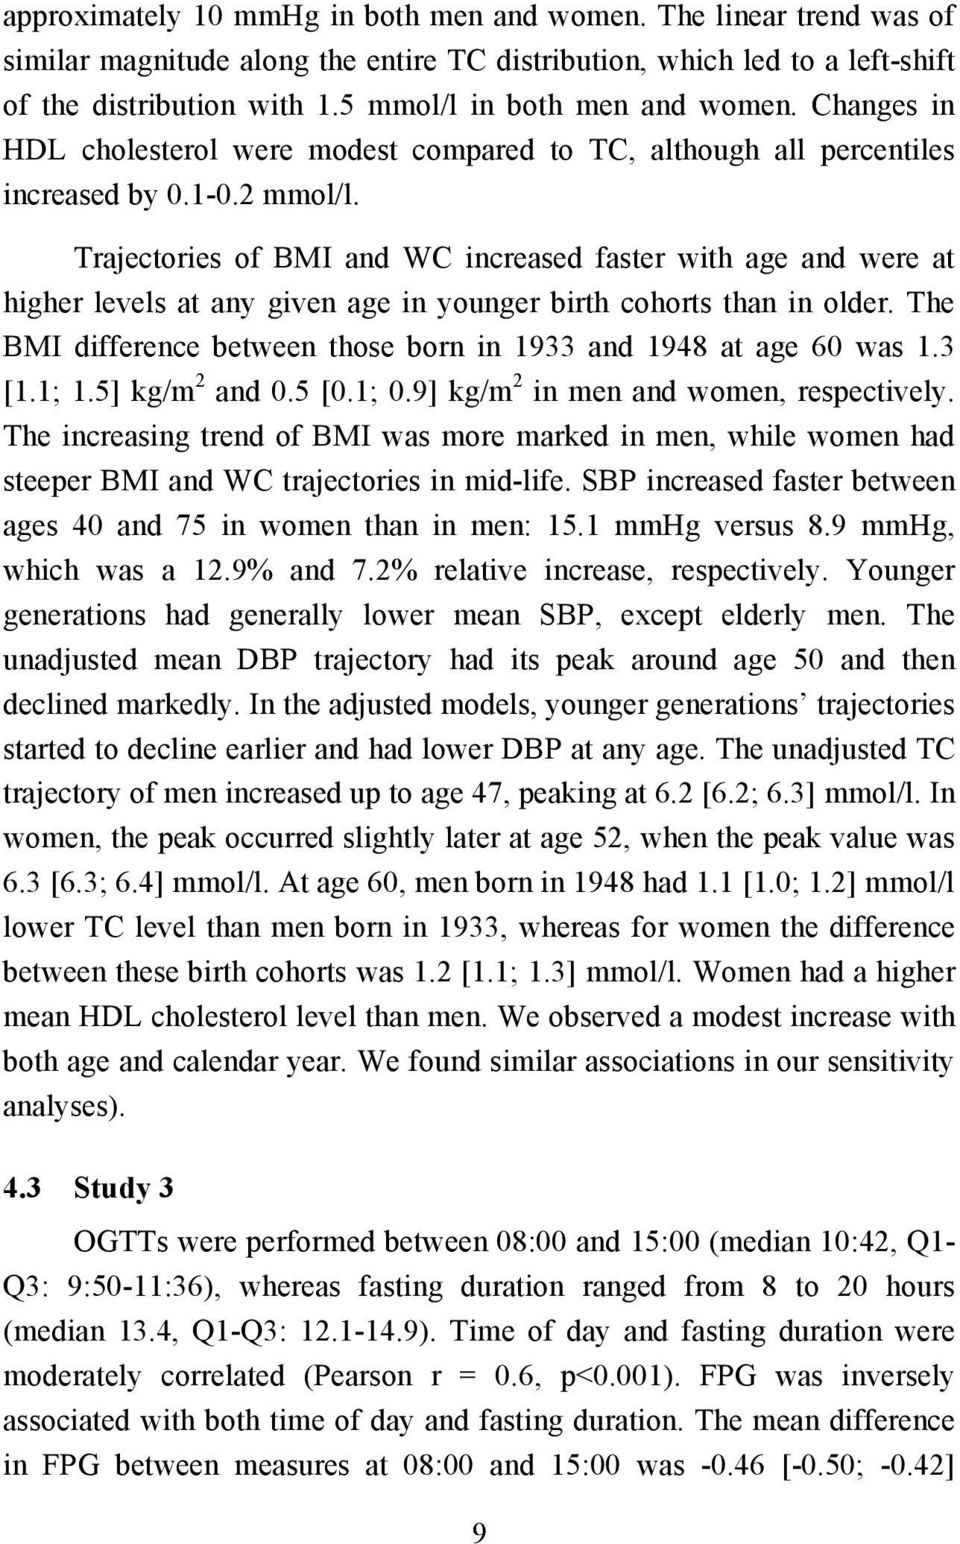 Trajectories of BMI and WC increased faster with age and were at higher levels at any given age in younger birth cohorts than in older.